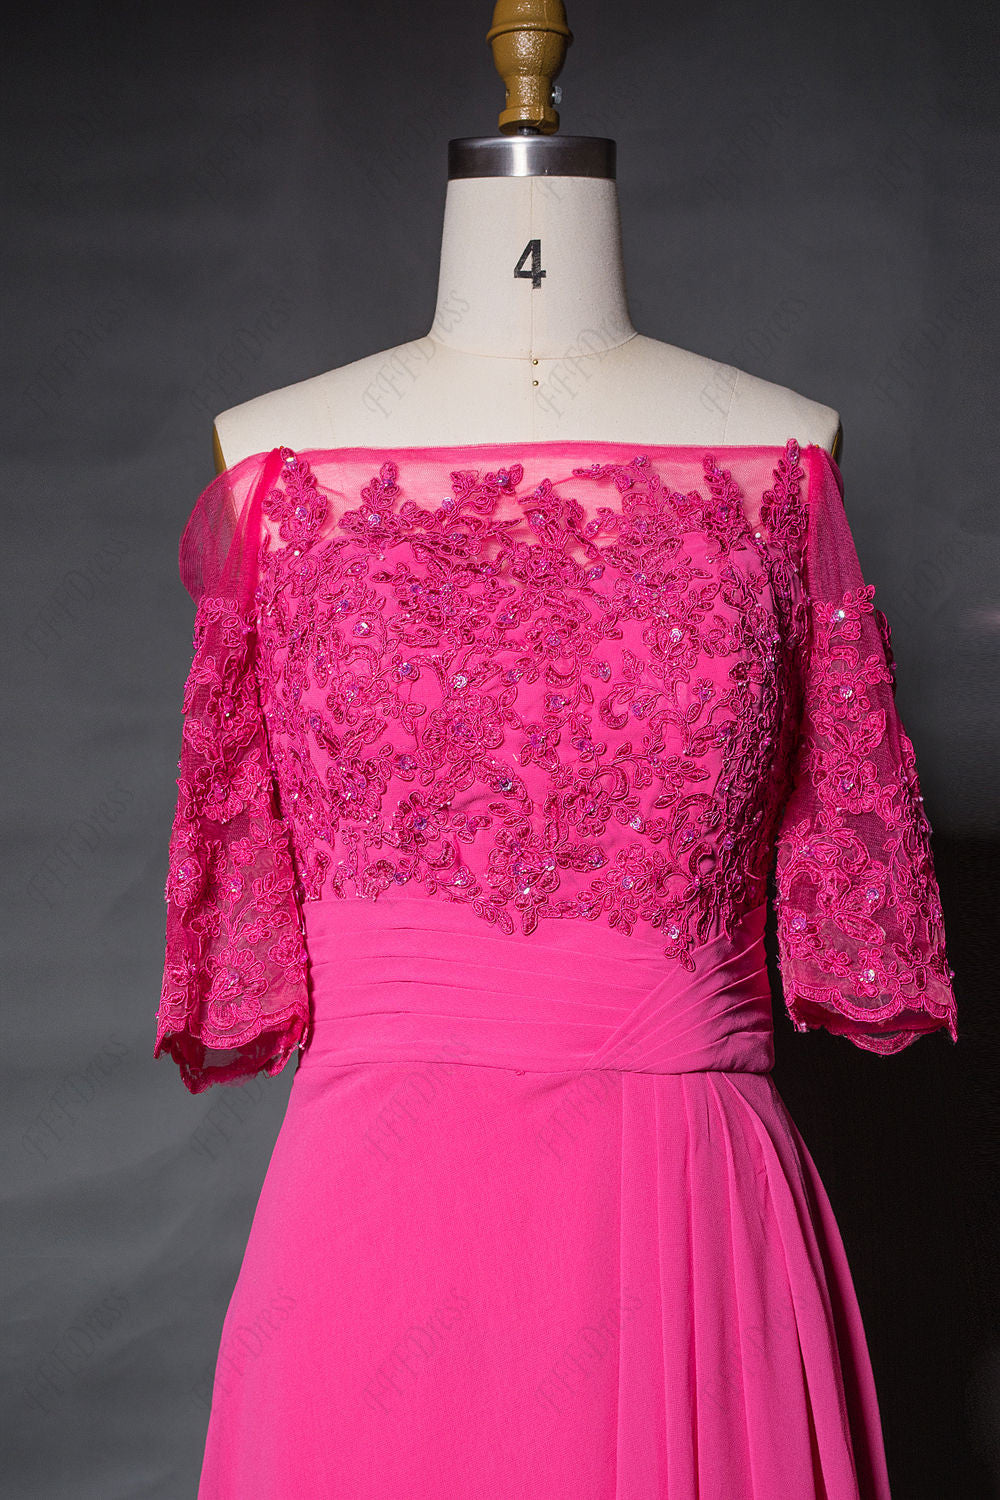 Off the shoulder fuchsia bridesmaid dress with sleeves